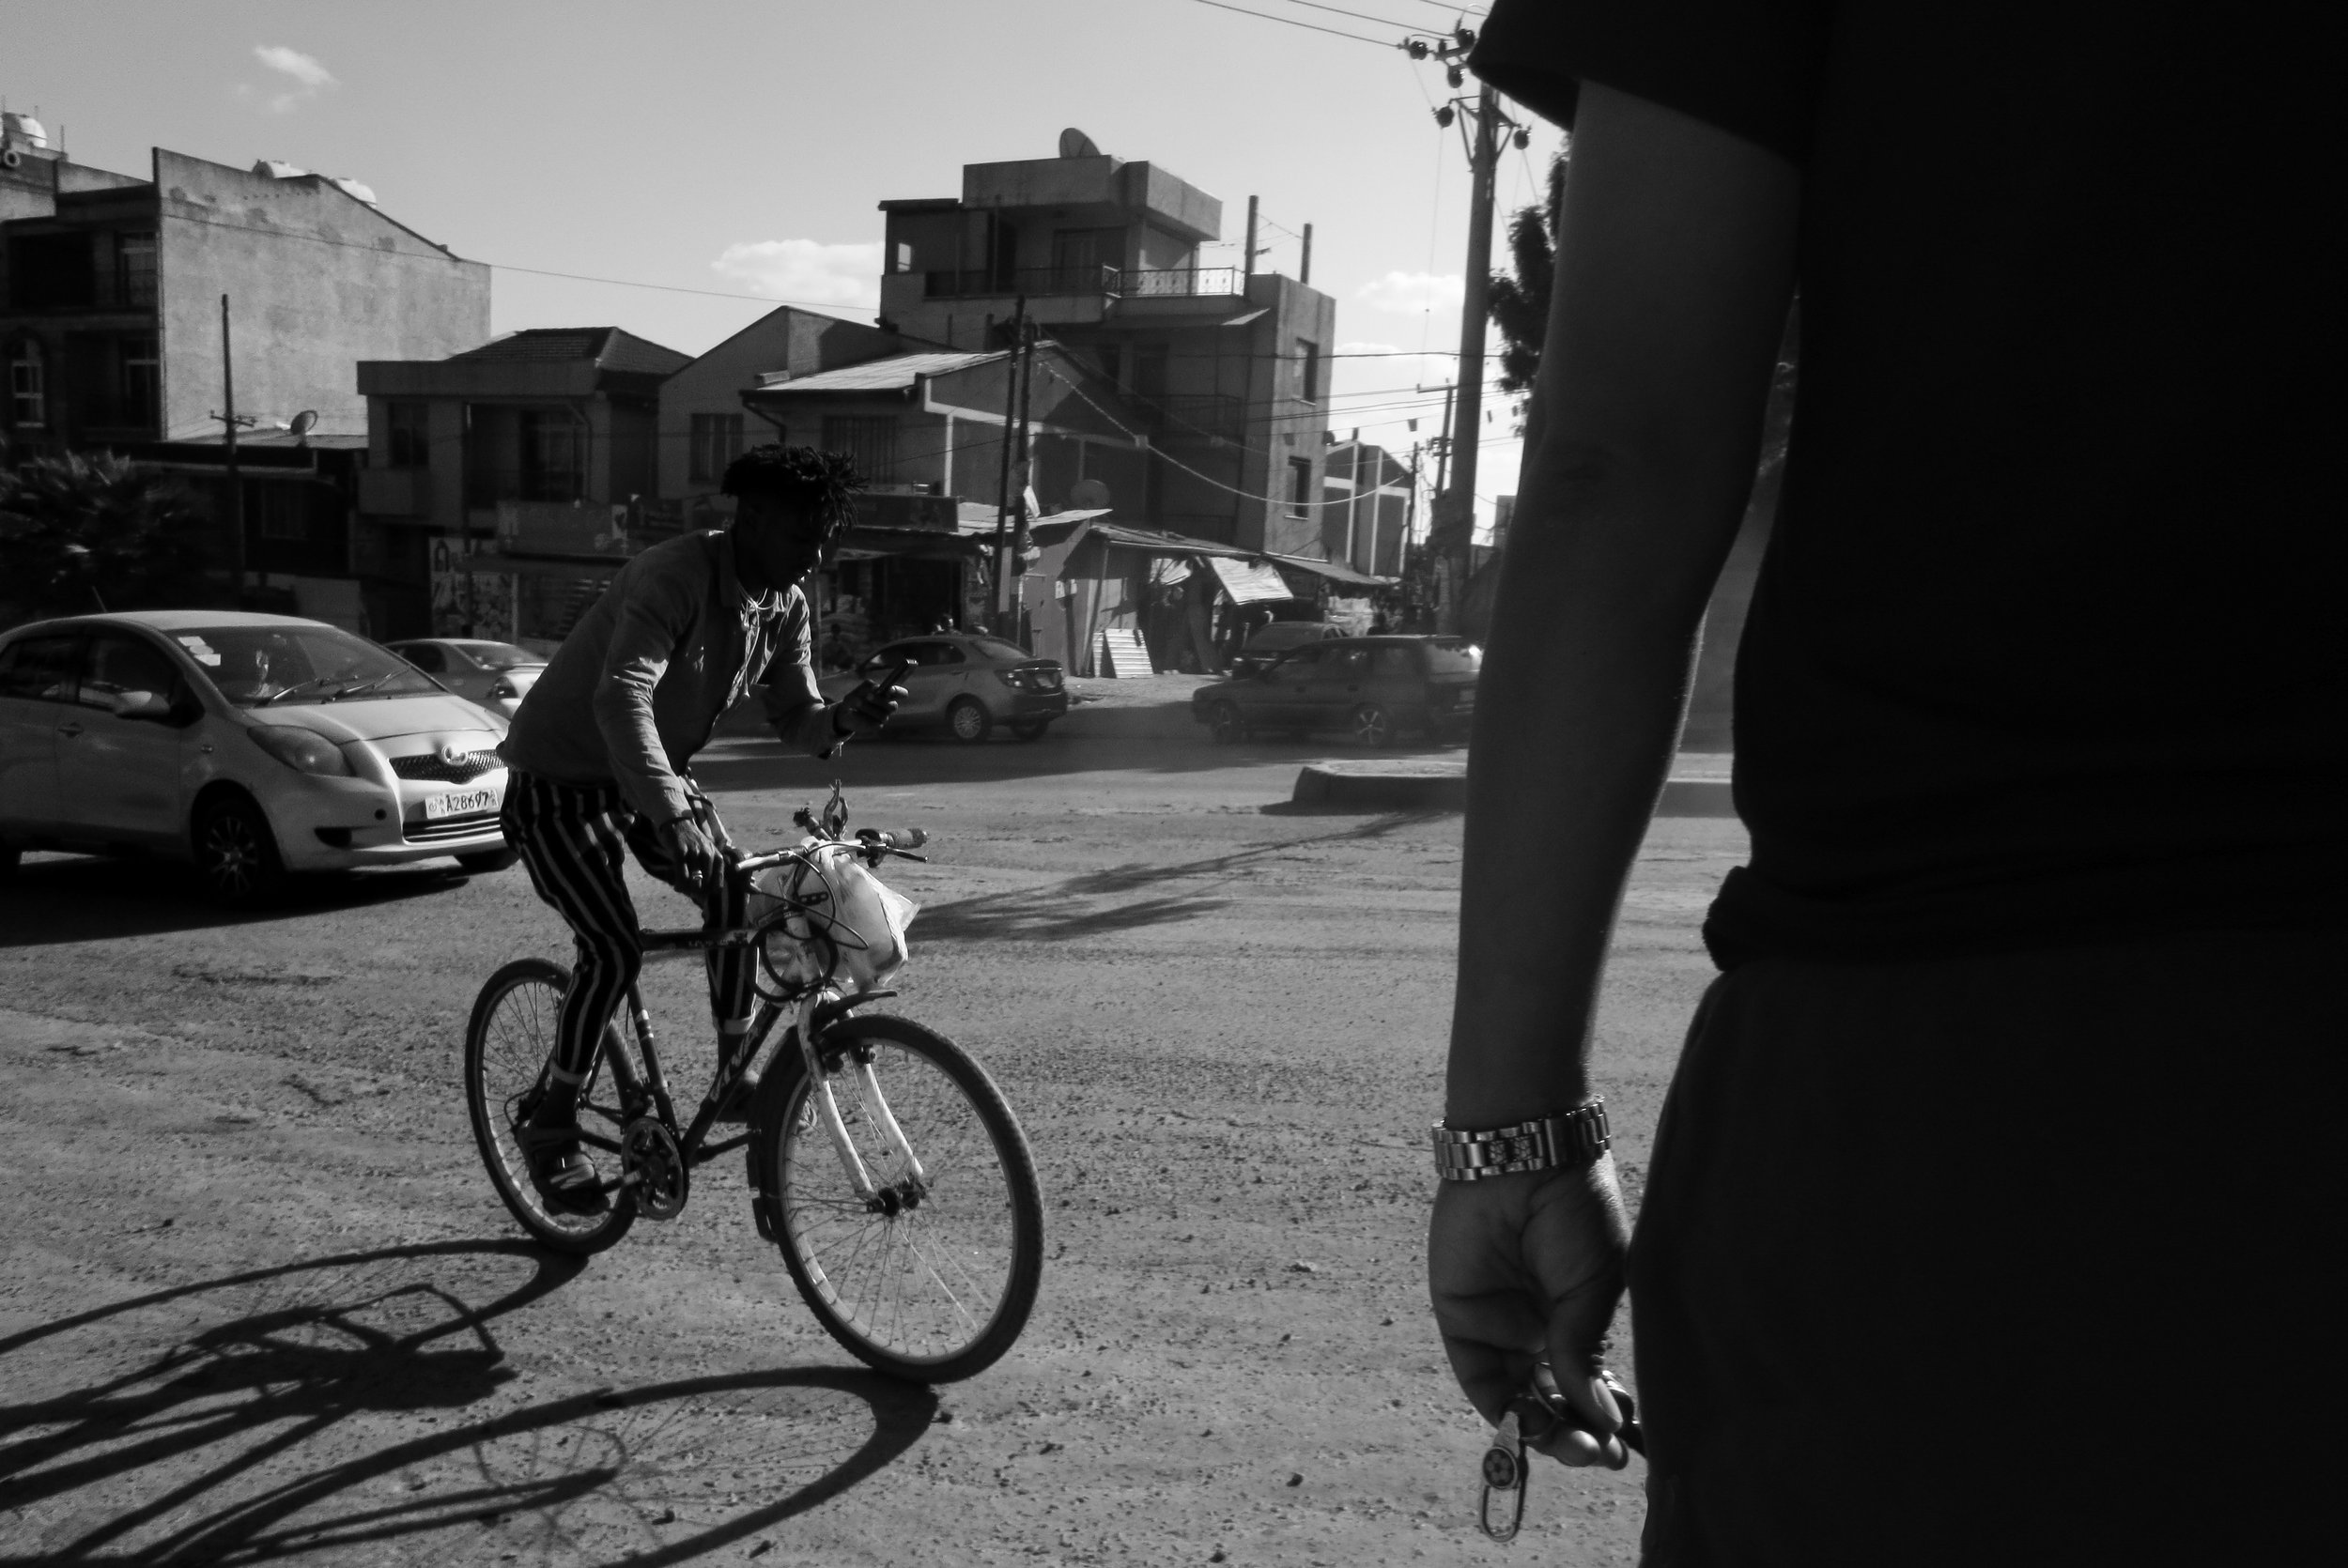  18. A young man is riding his bicycle along a road, engrossed in checking his phone with one hand as he pedals with the other. With the sun setting in the background. 